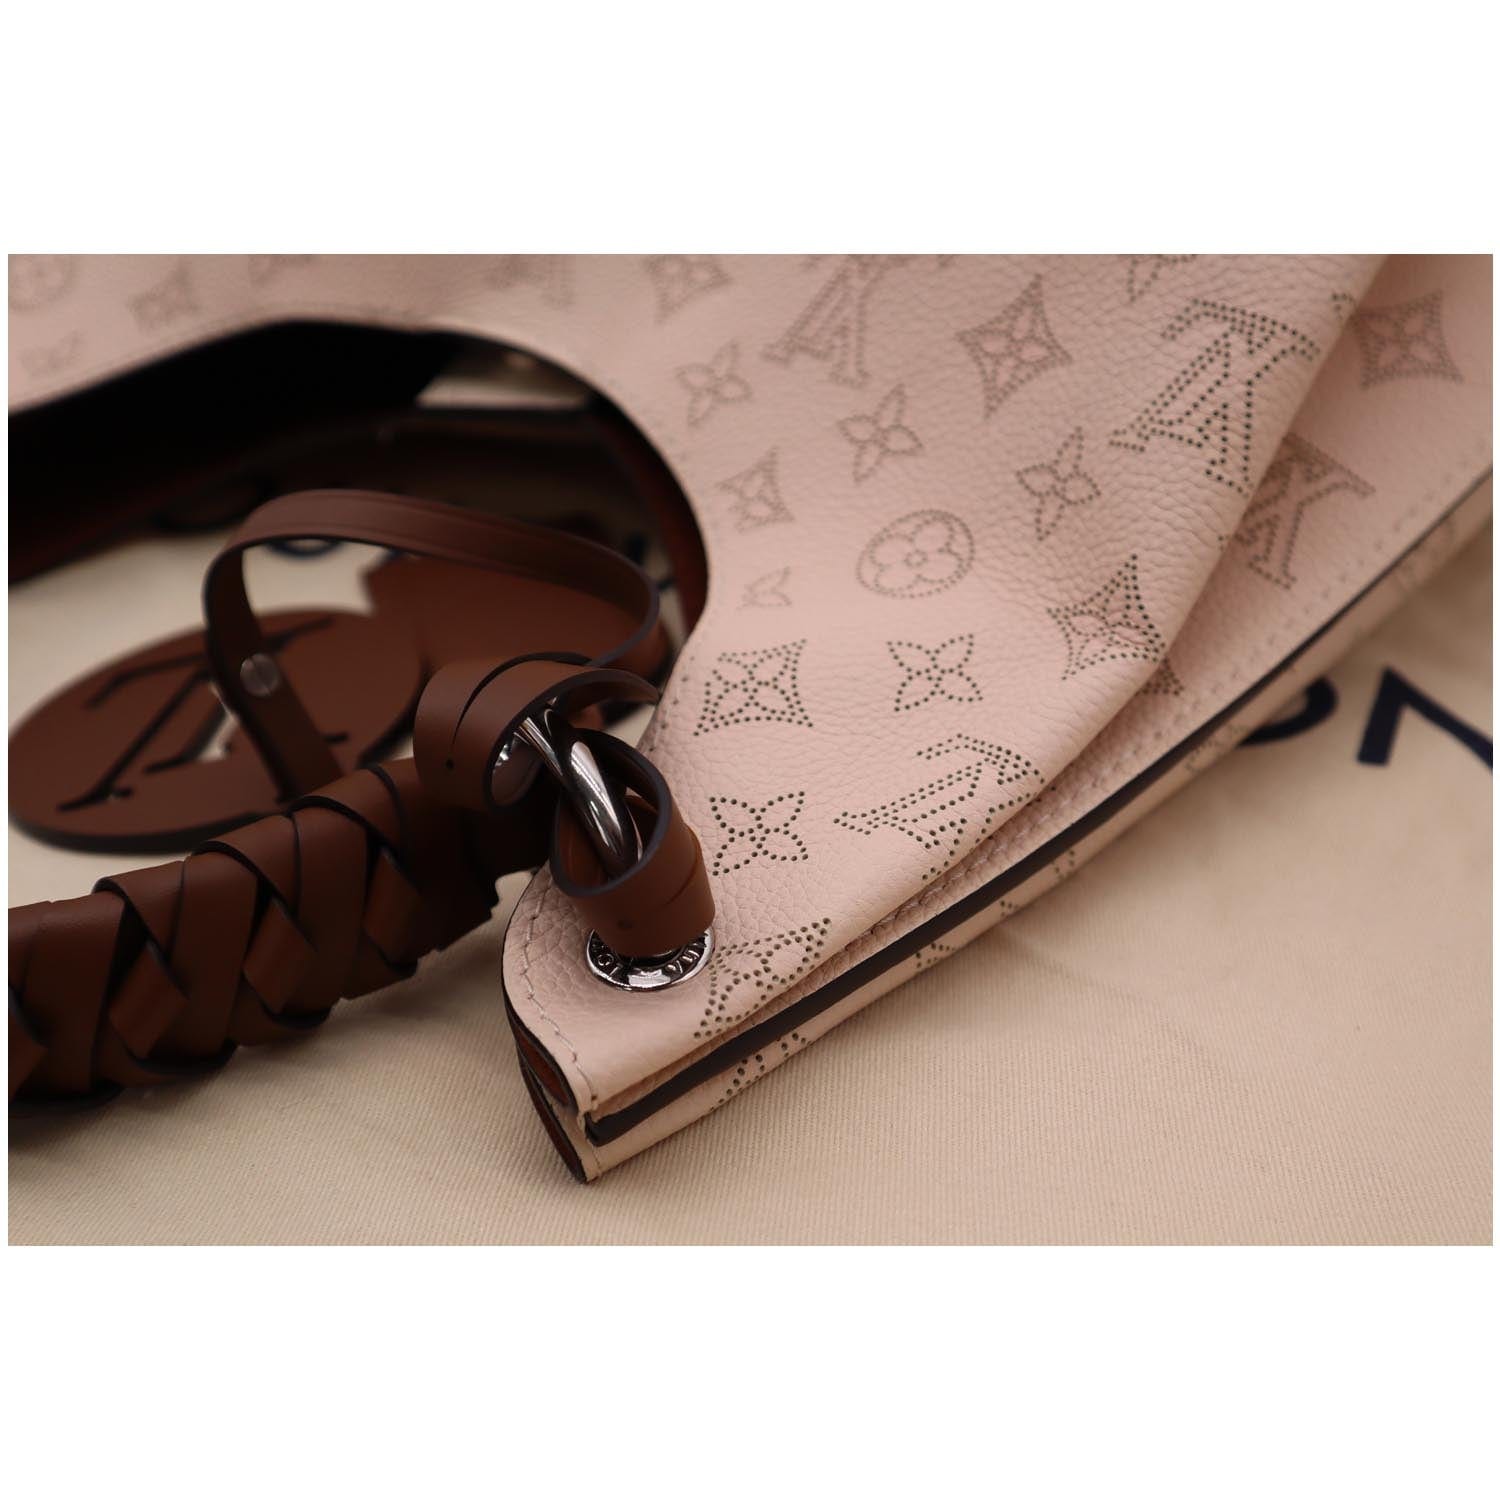 Leather handbag Louis Vuitton Pink in Leather - 30120307